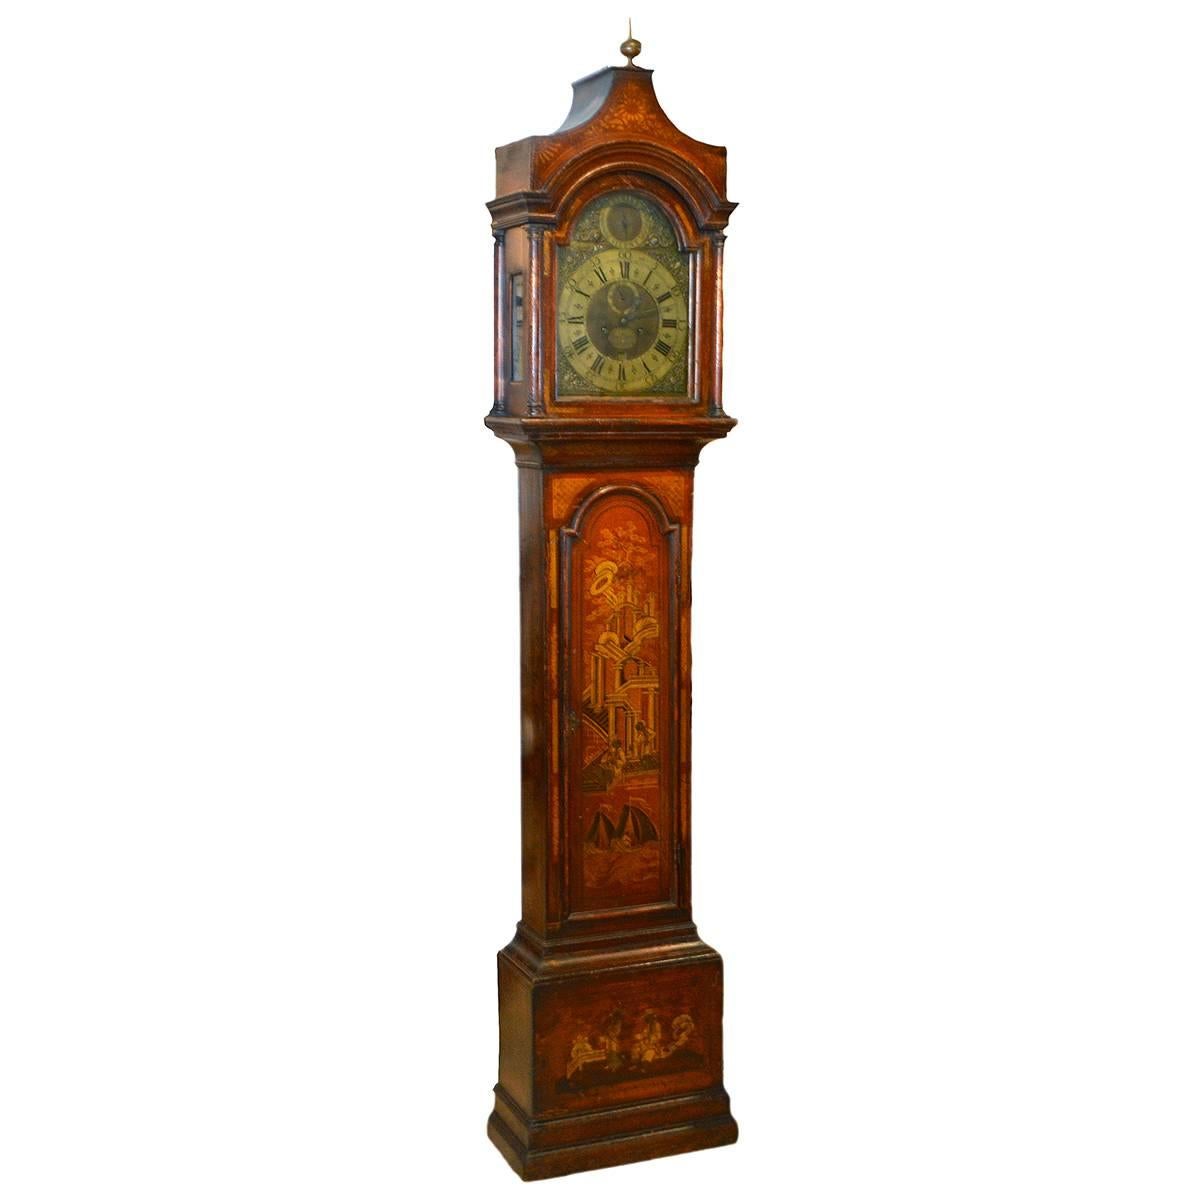 Wonderful English 18th-19th Century Red Chinoiserie Grandfather Clock